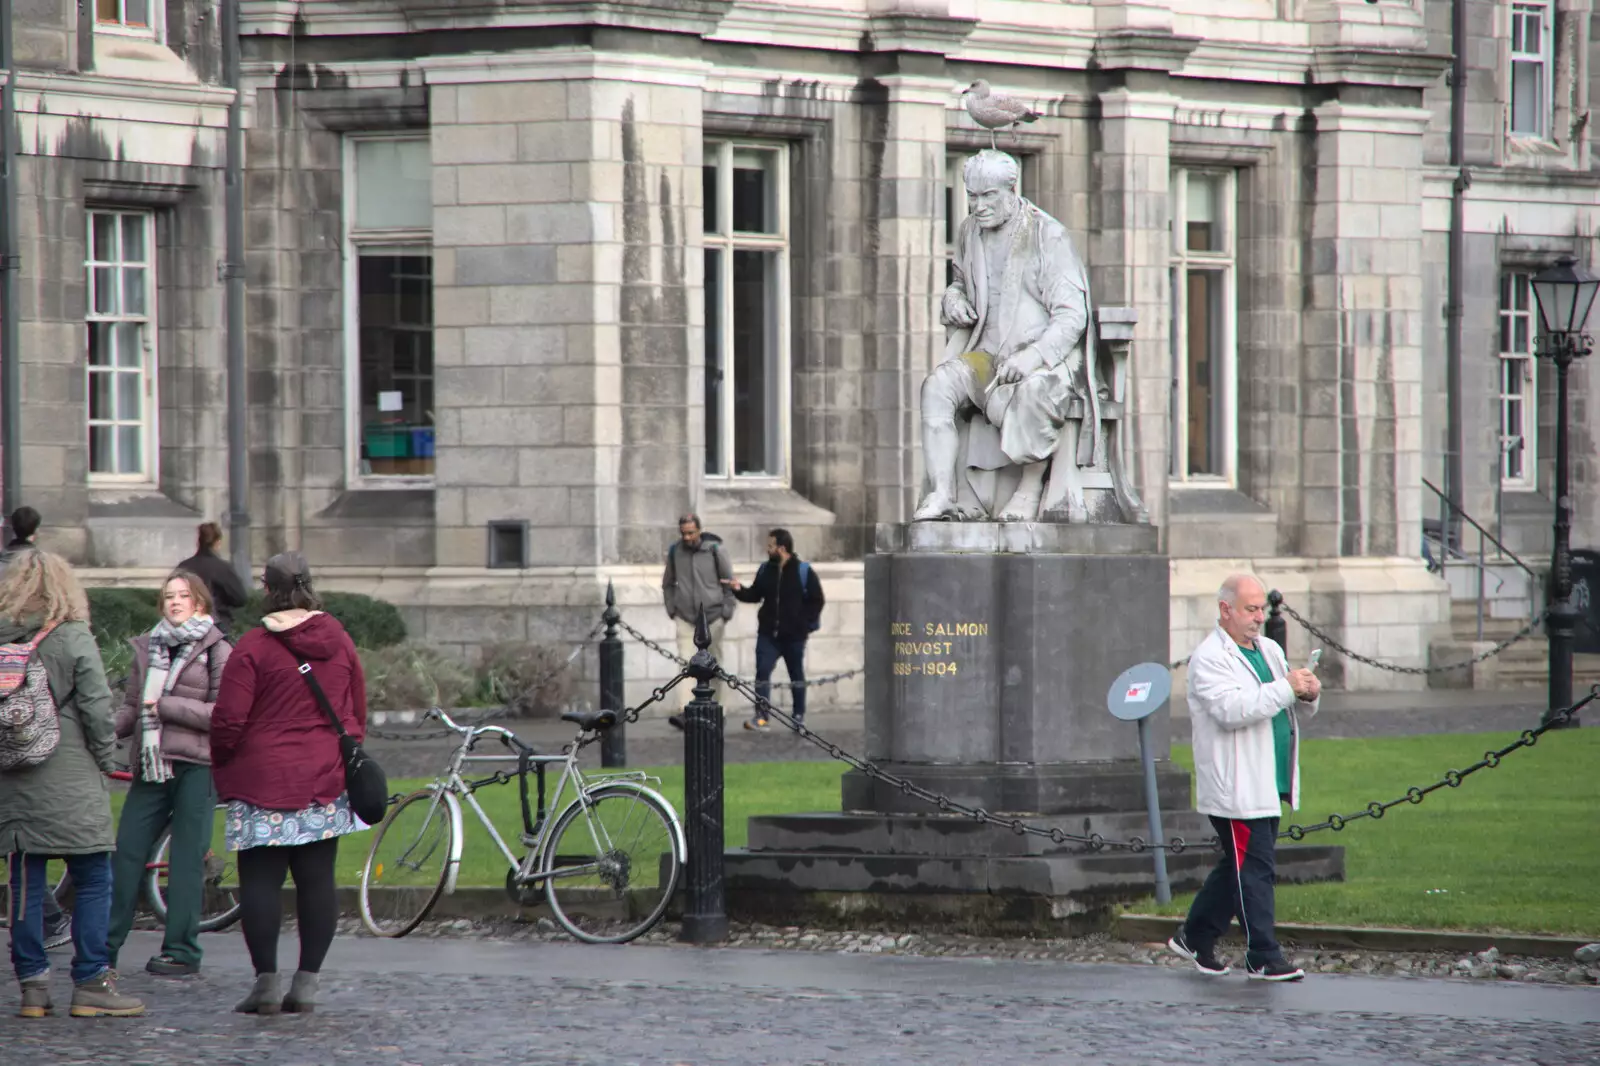 A statue of George Salmon, provost of Trinity, from The Dead Zoo, Dublin, Ireland - 17th February 2023